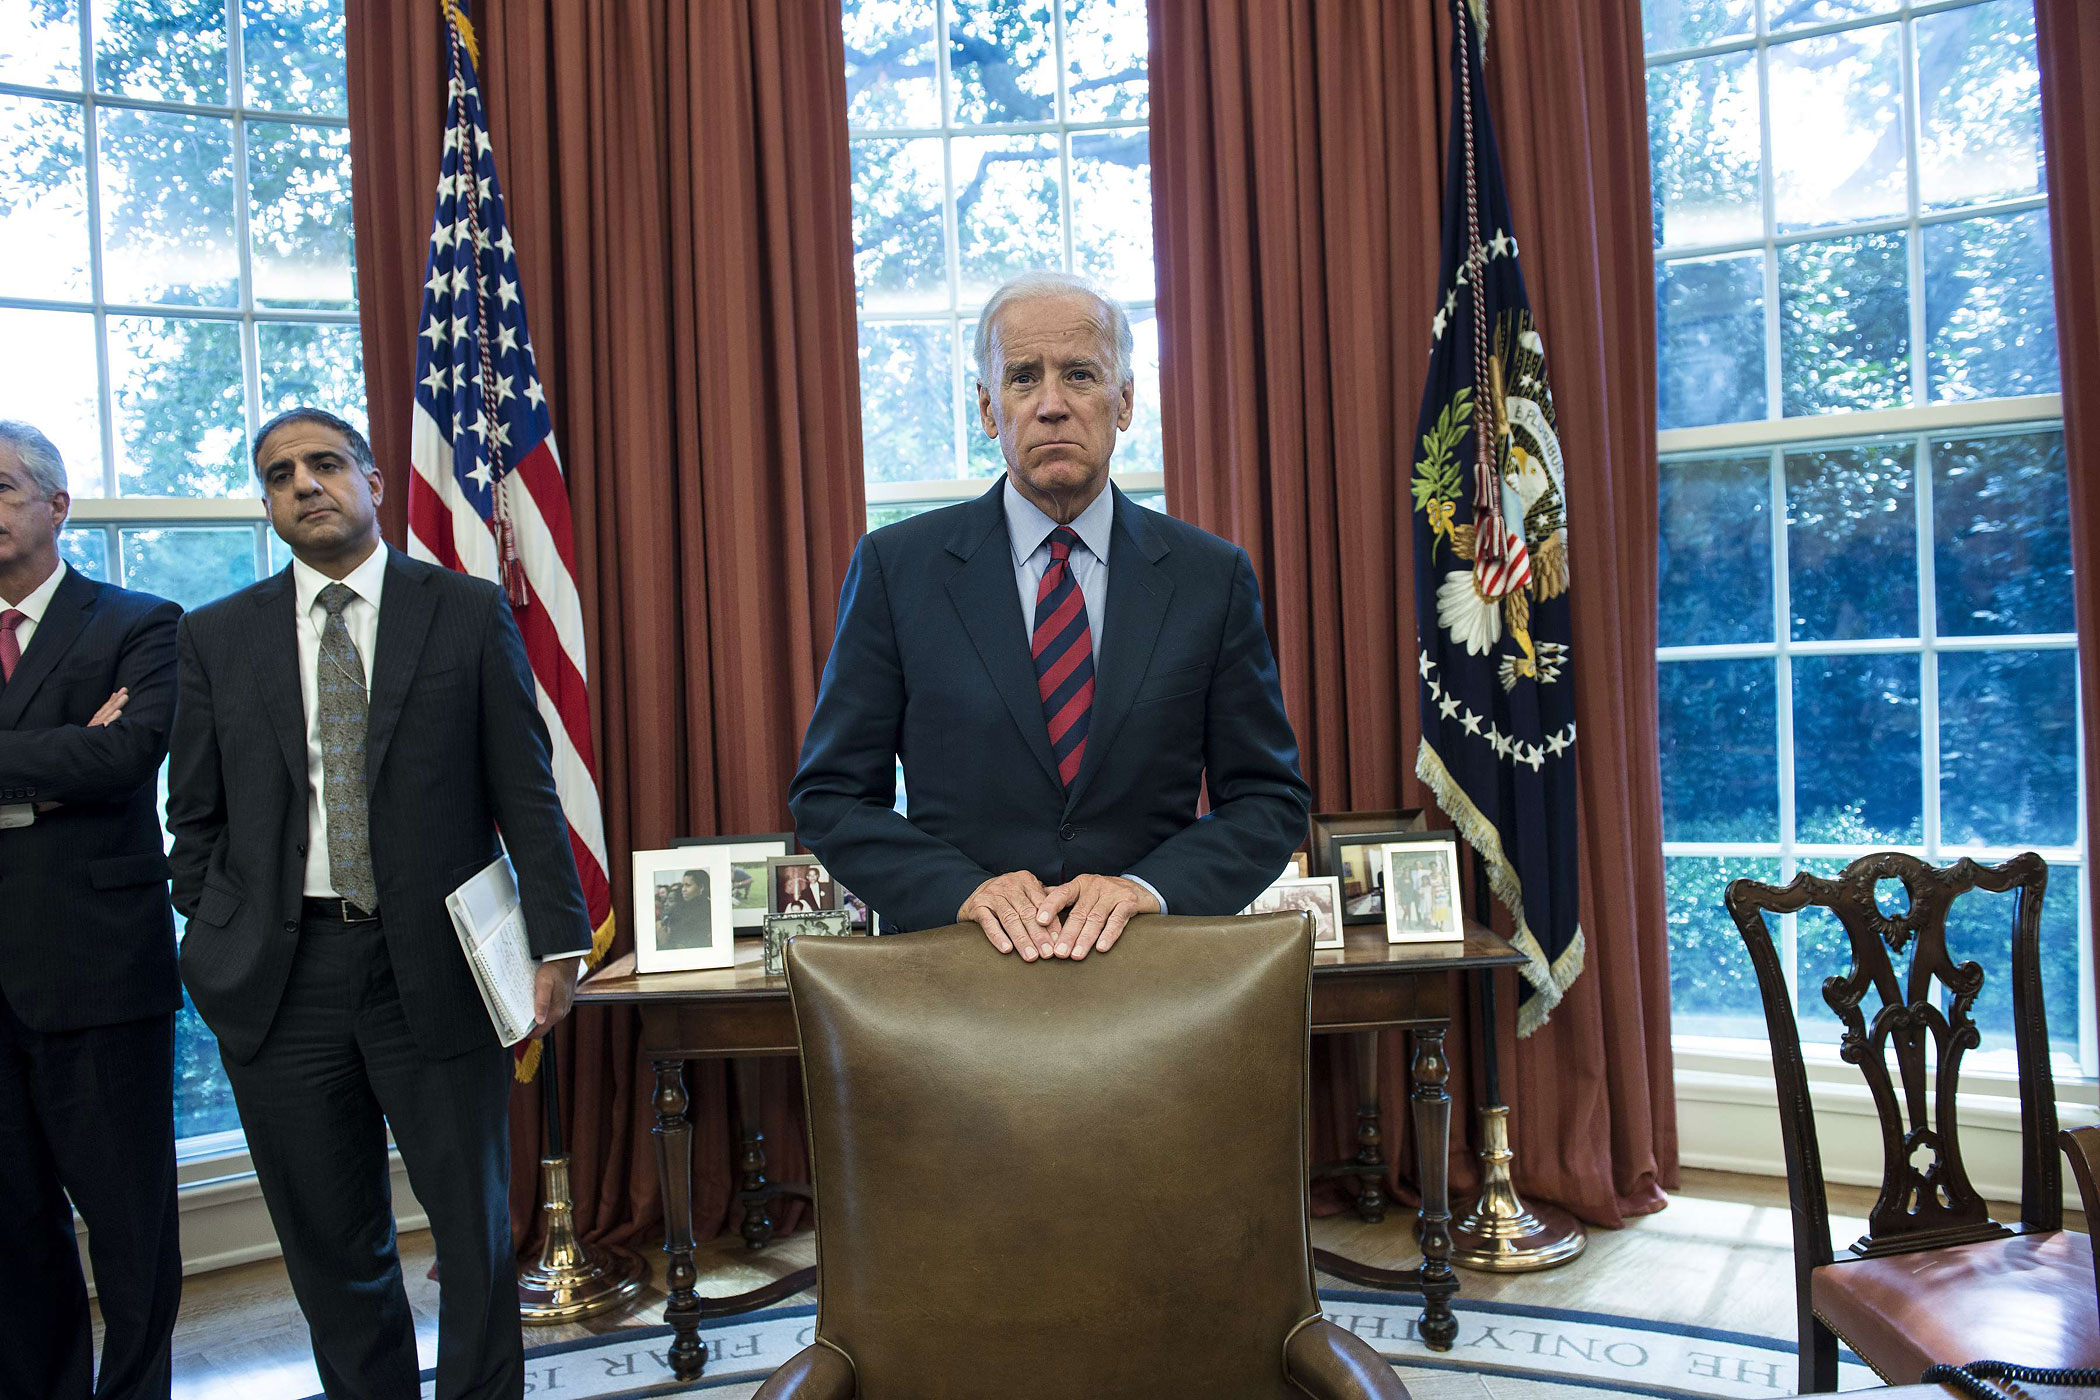 Sept. 13, 2013. Vice President Joseph R. Biden listens while the Emir of Kuwait Sheikh Sabah al-Ahmad Al-Jabar Al-Sabah  and President Barack Obama speak to the press after a meeting in the Oval Office of the White House in Washington.